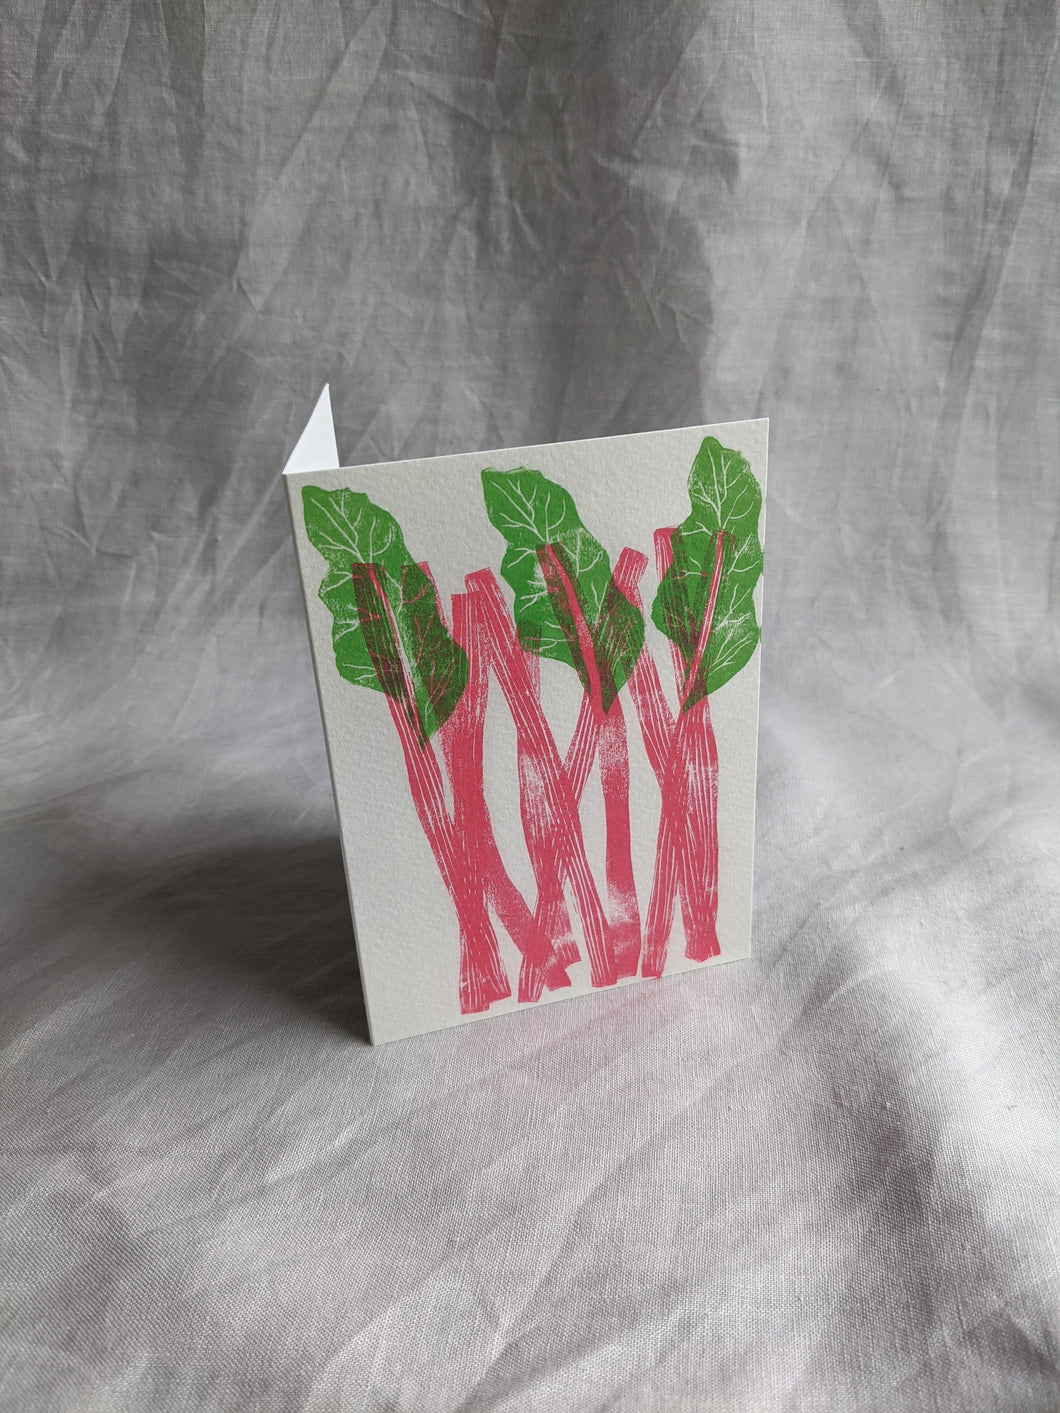 A white card printed with pink rhubarb stems and three green leaves